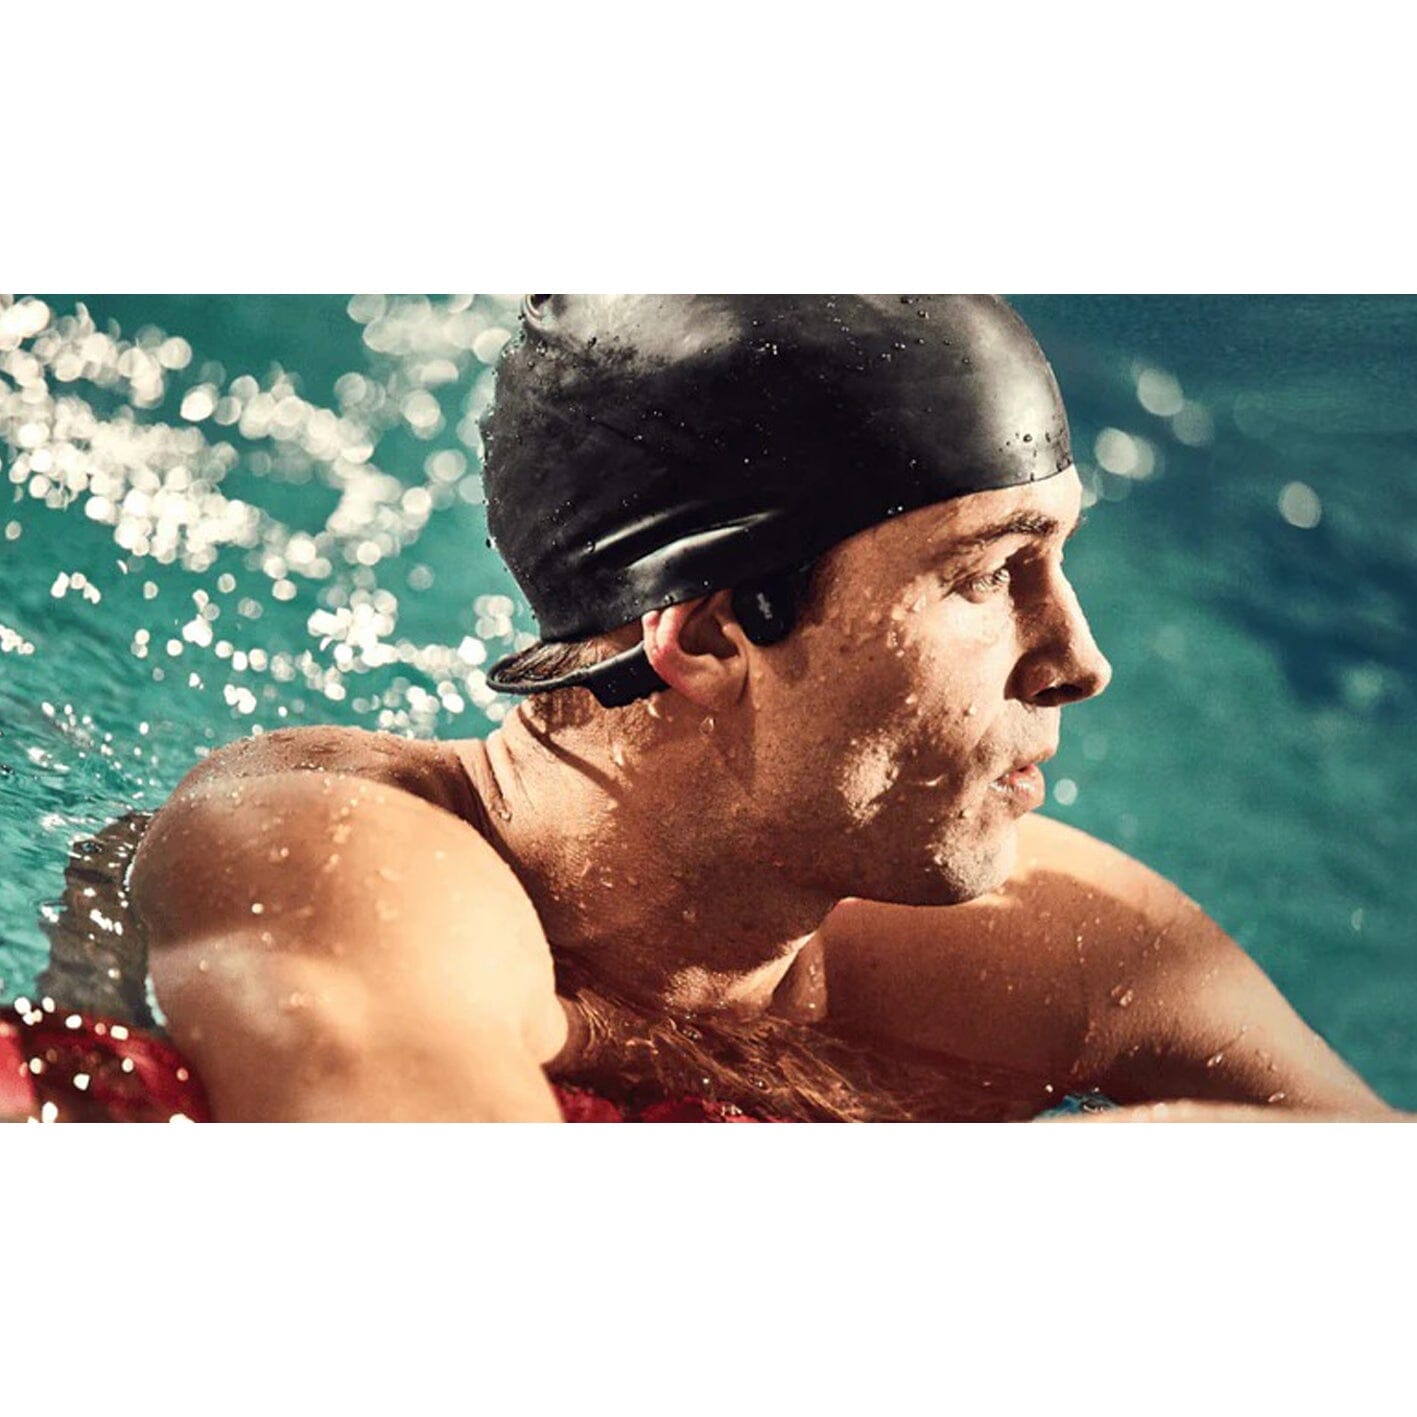 SHOKZ OpenSwim Swimming MP3 - Bone Conduction MP3 Waterproof Headphones for Swimming - Open-Ear Wireless Headphones, No Bluetooth, with Nose Clip and Earplug (Black) ONE2WORLD 